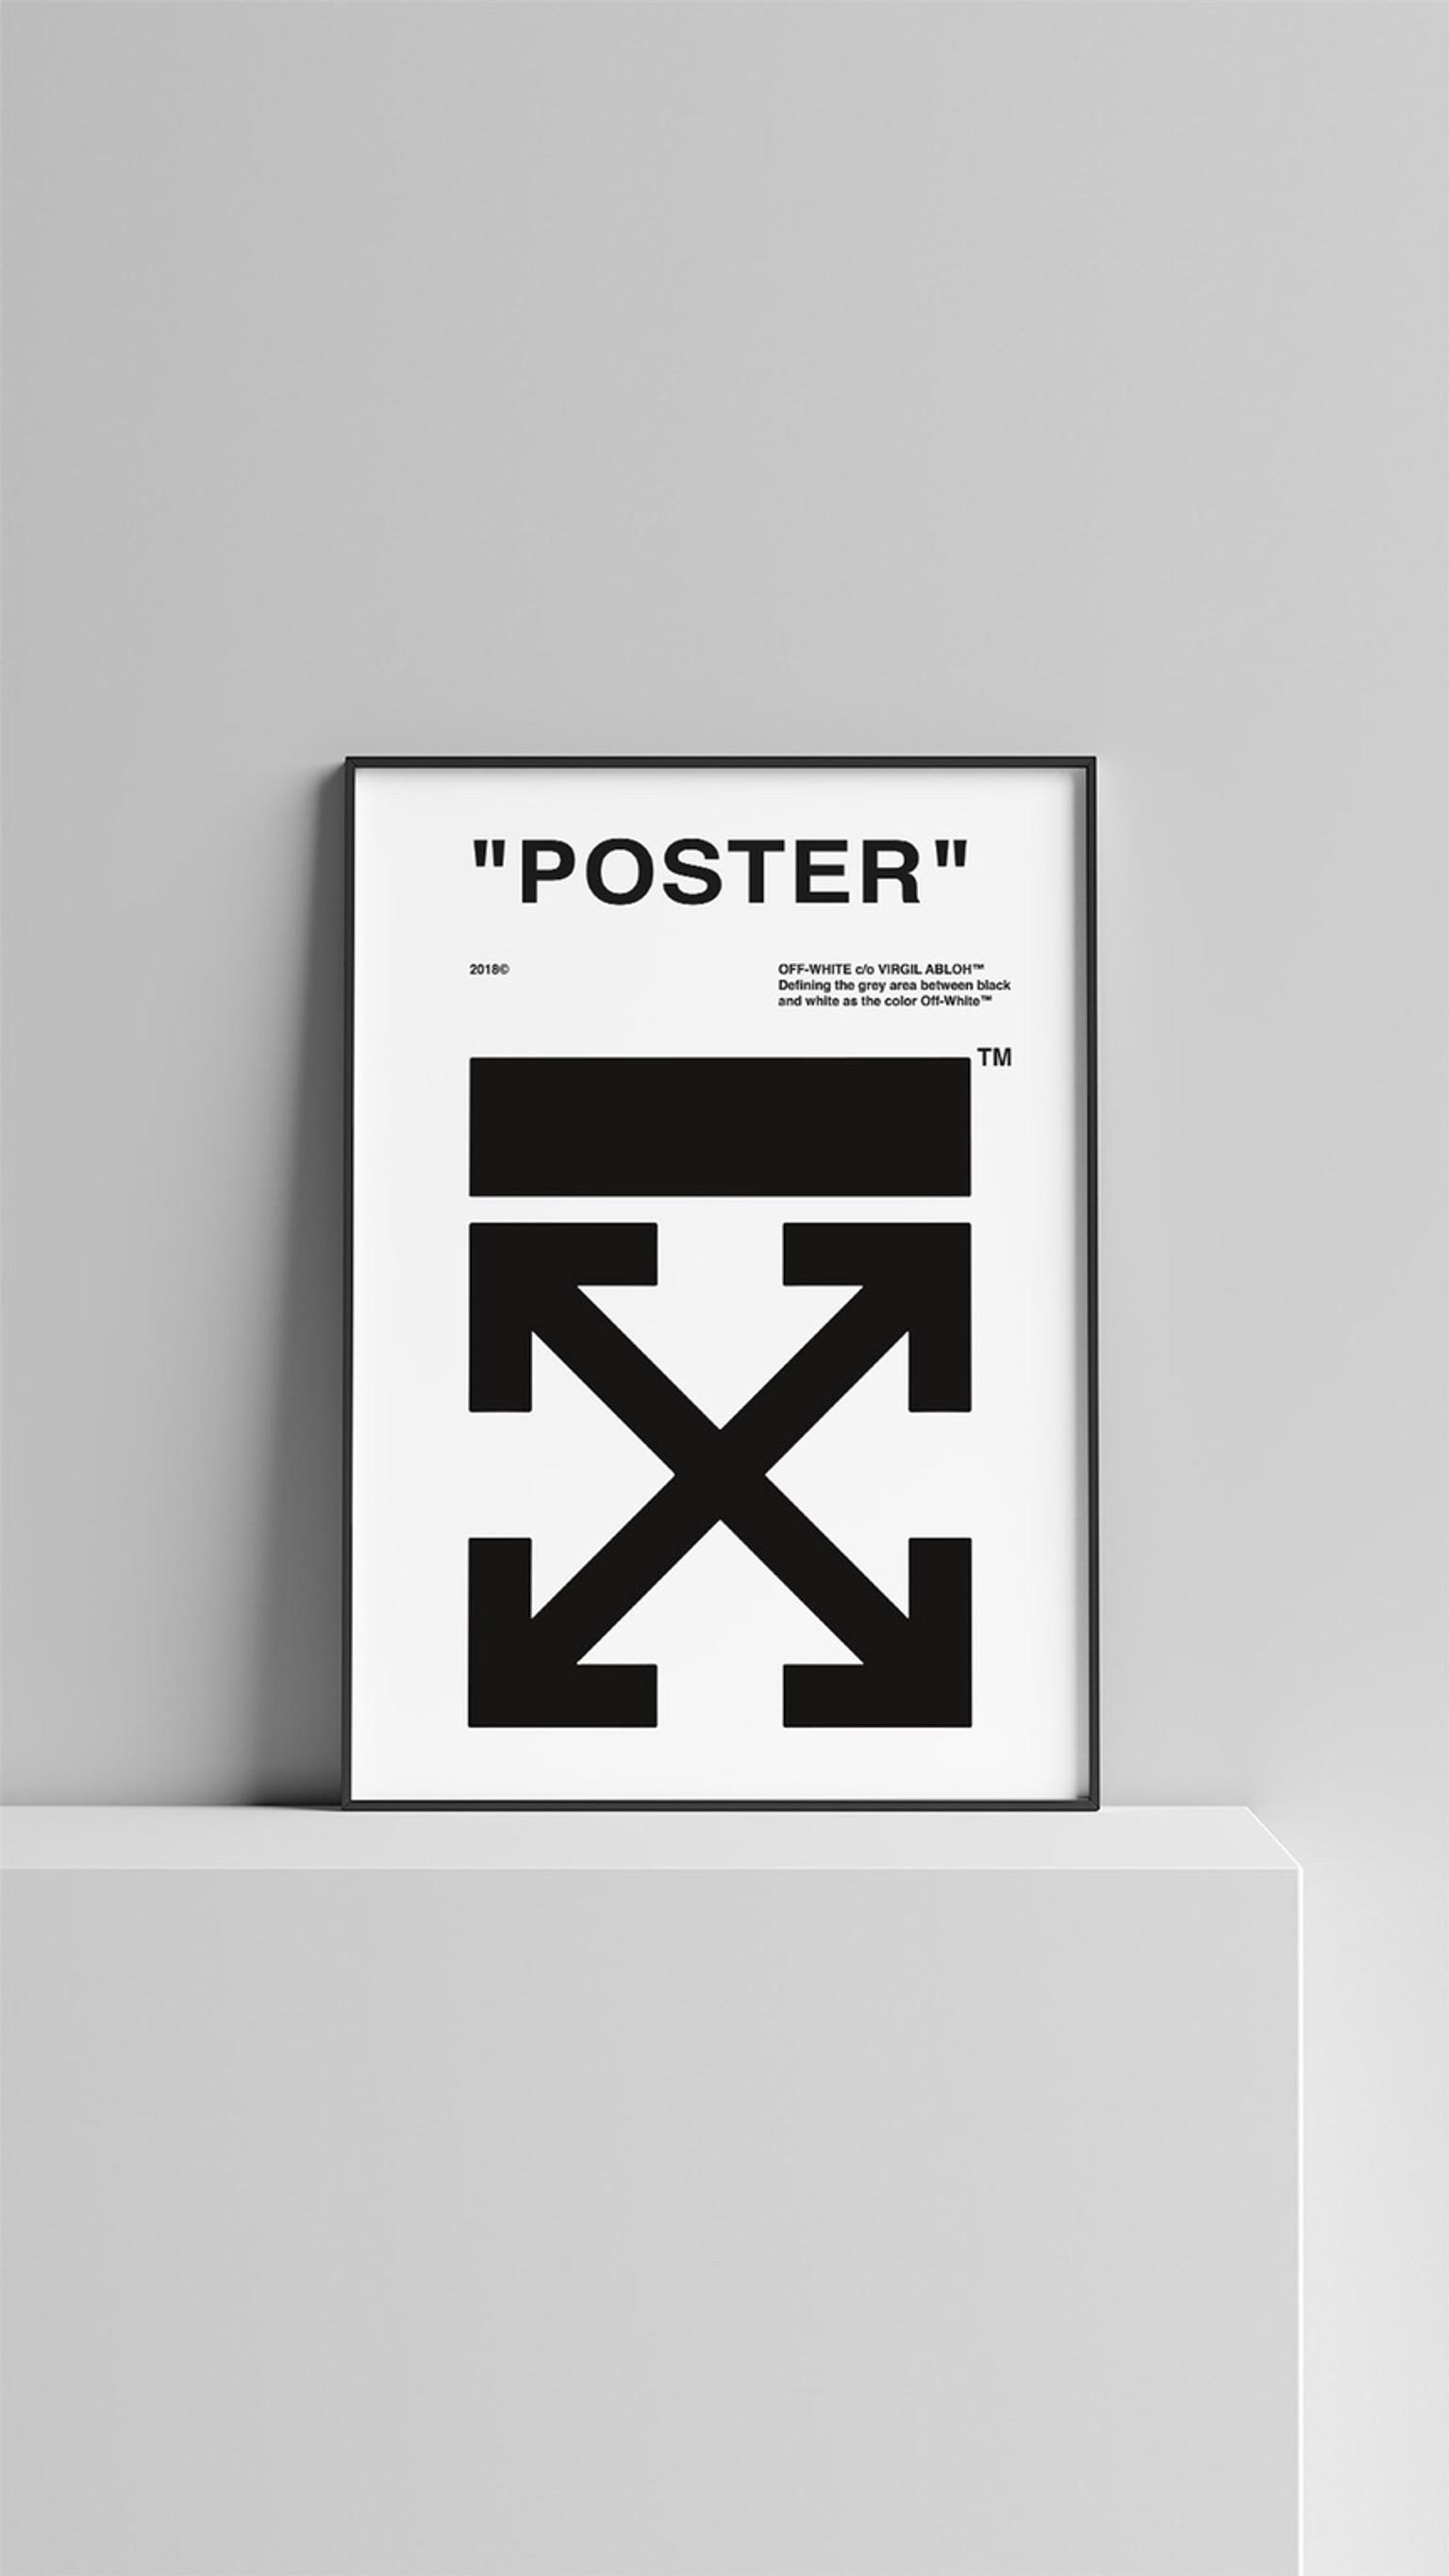 Off White Poster A3 In 40 Linz For 15 00 For Sale Shpock